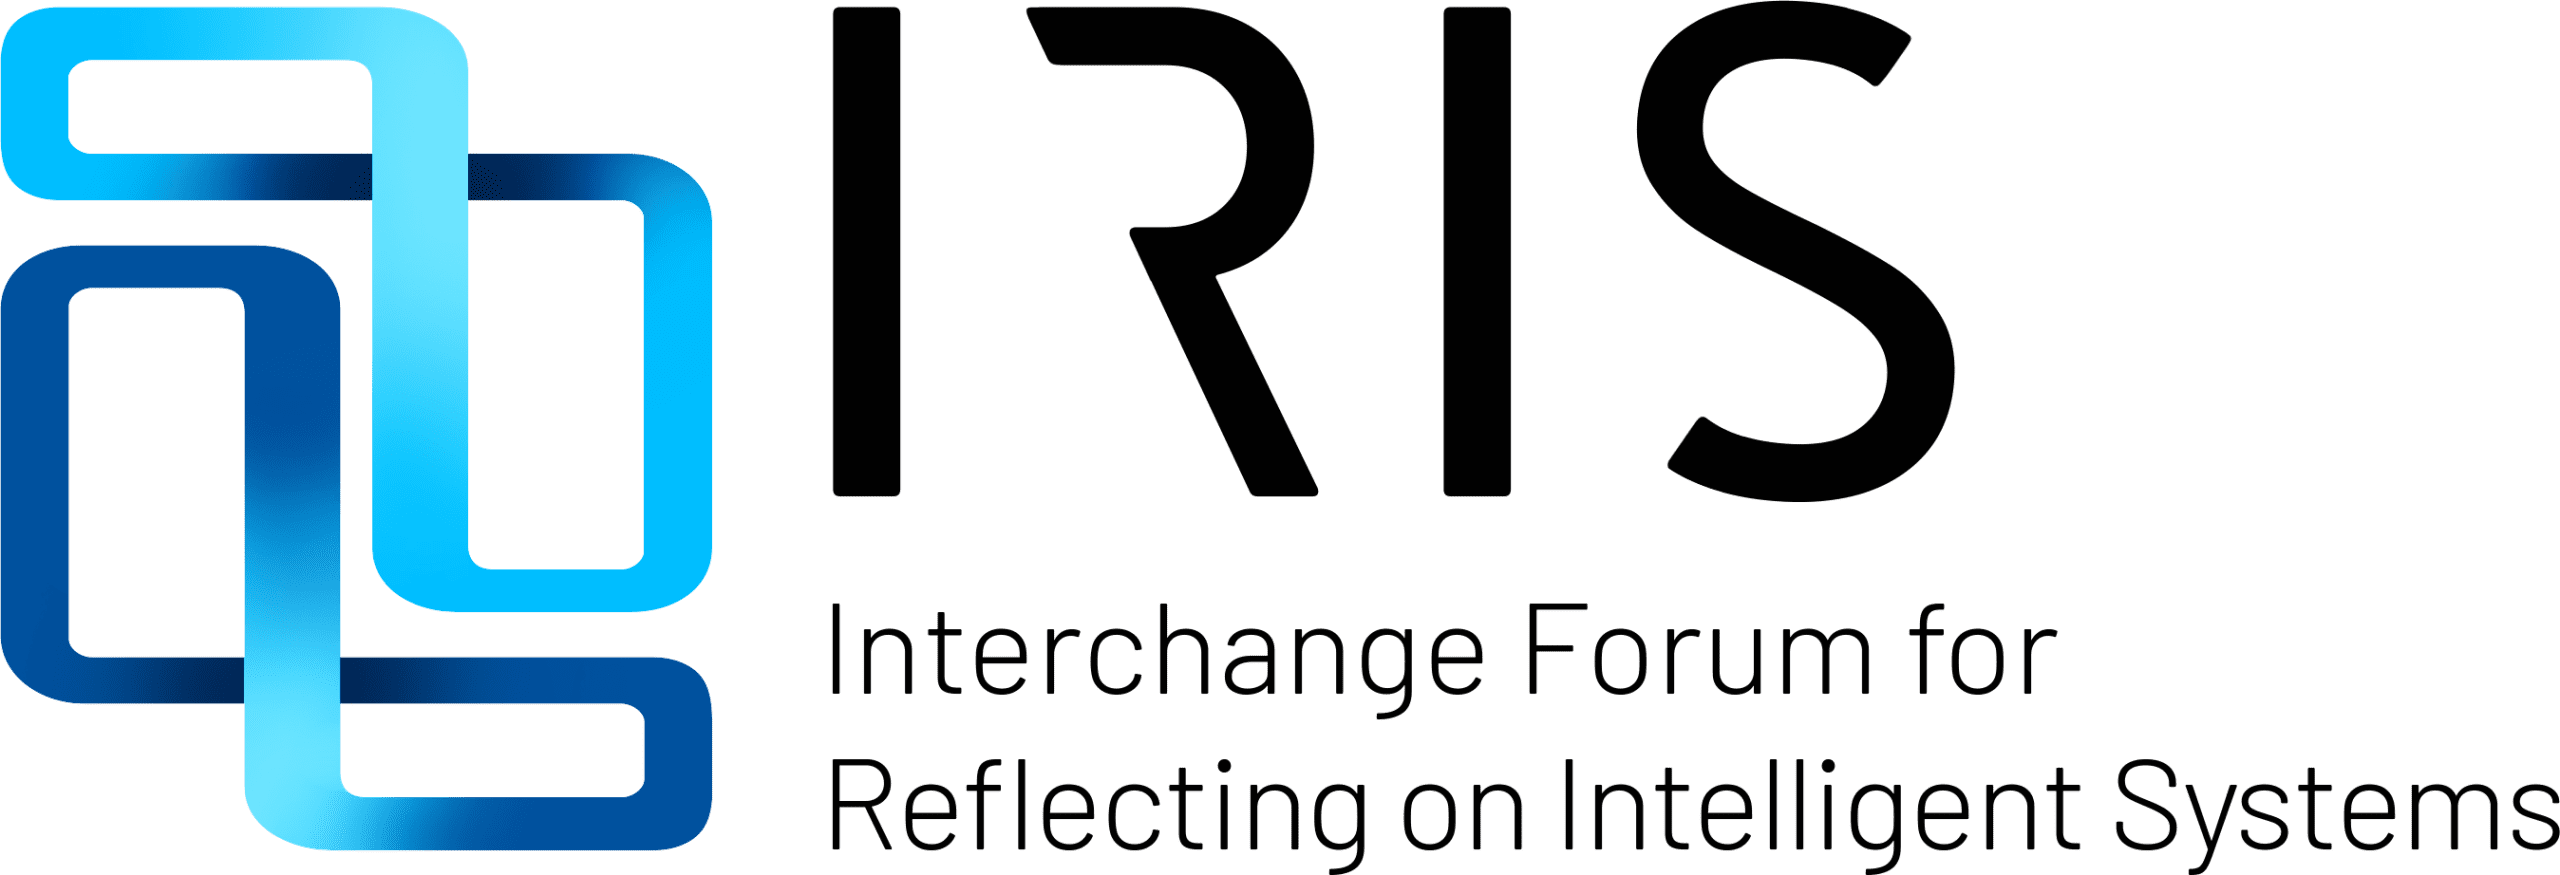 Interchange Forum for Reflecting on Intelligent Systems